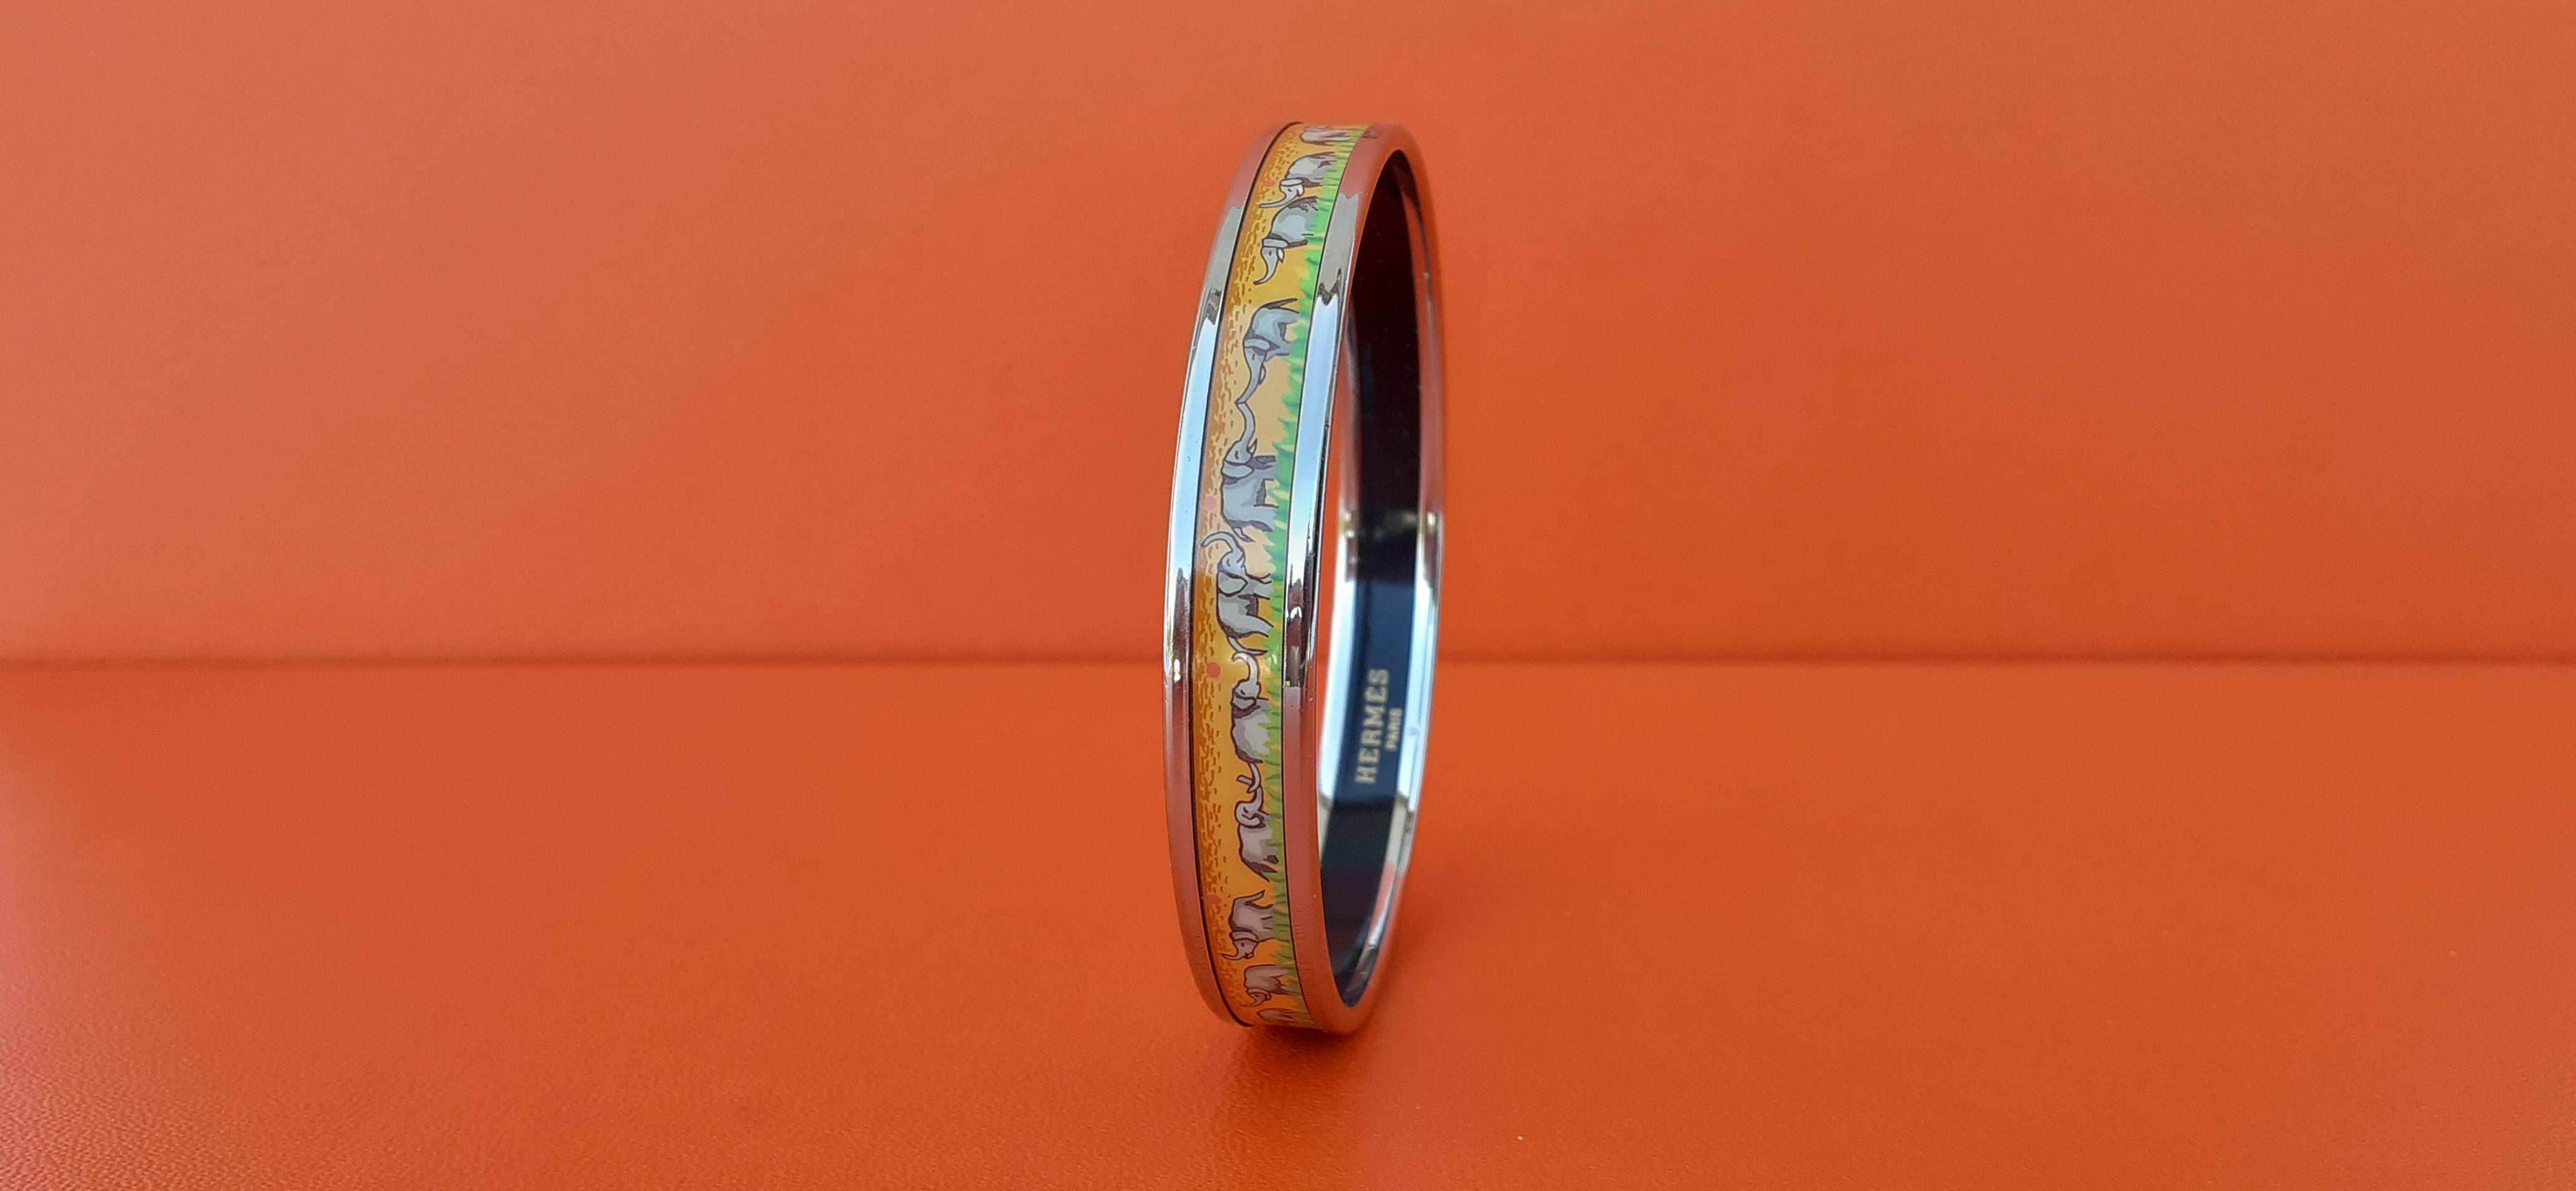 Gorgeous Authentic Hermès Bracelet

Pattern: Elephants Grazing

Hard to find ! One of the most thought after Hermès Bracelet

Made in Austria + F

Made of printed Enamel and Palladium Plated Hardware (Silver Tone)

Colorways: Yellow background with